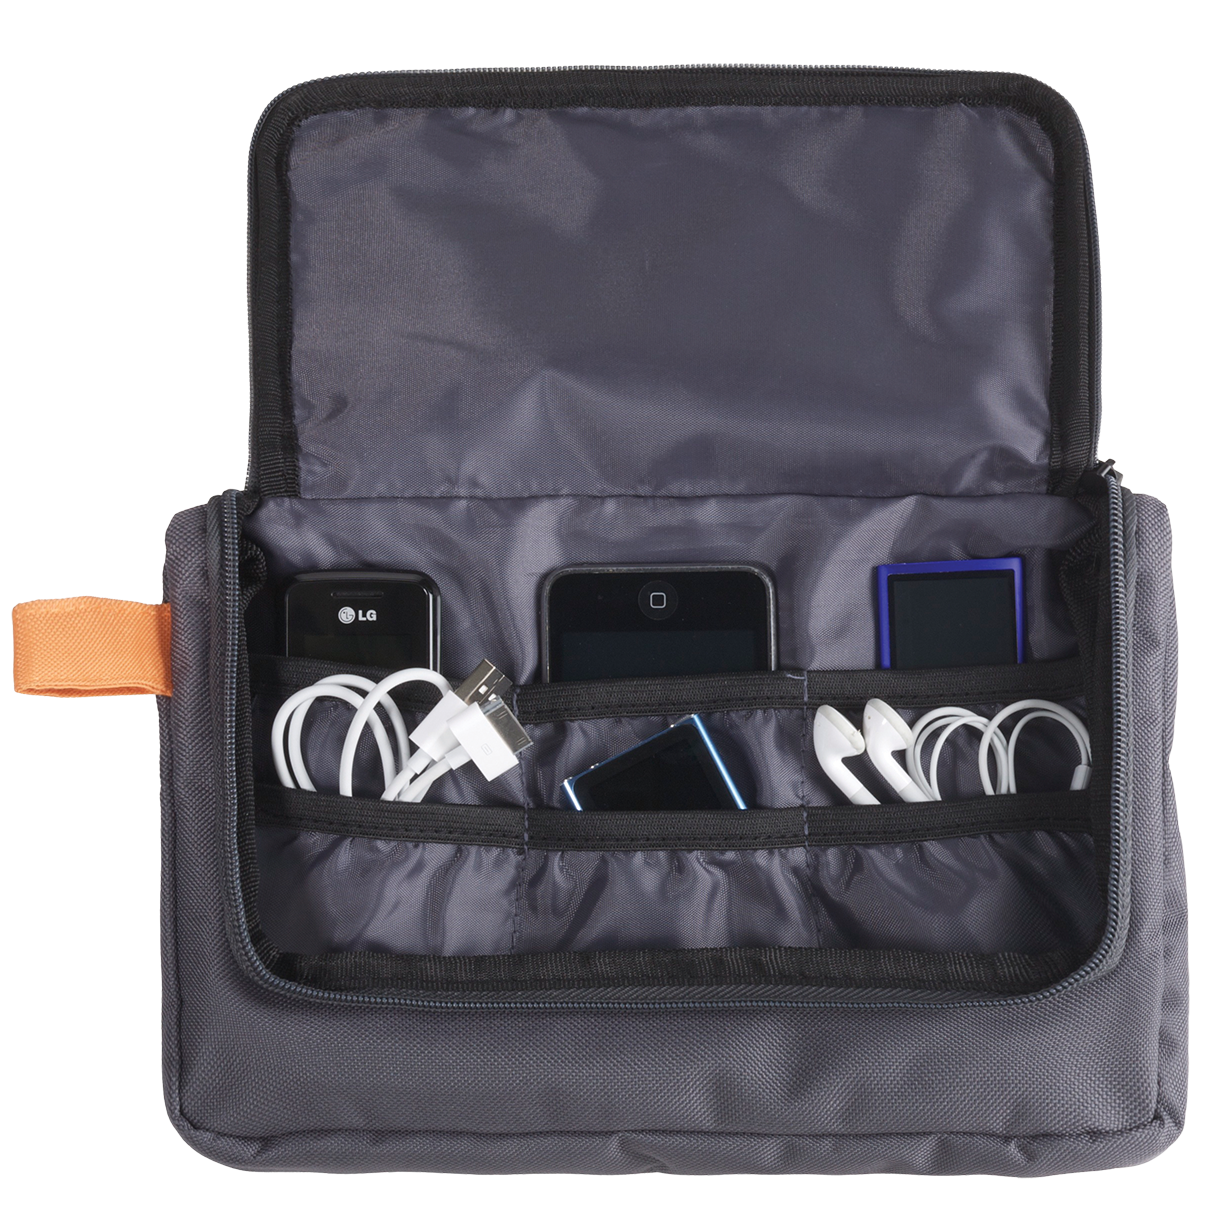 Personal Media Pouch